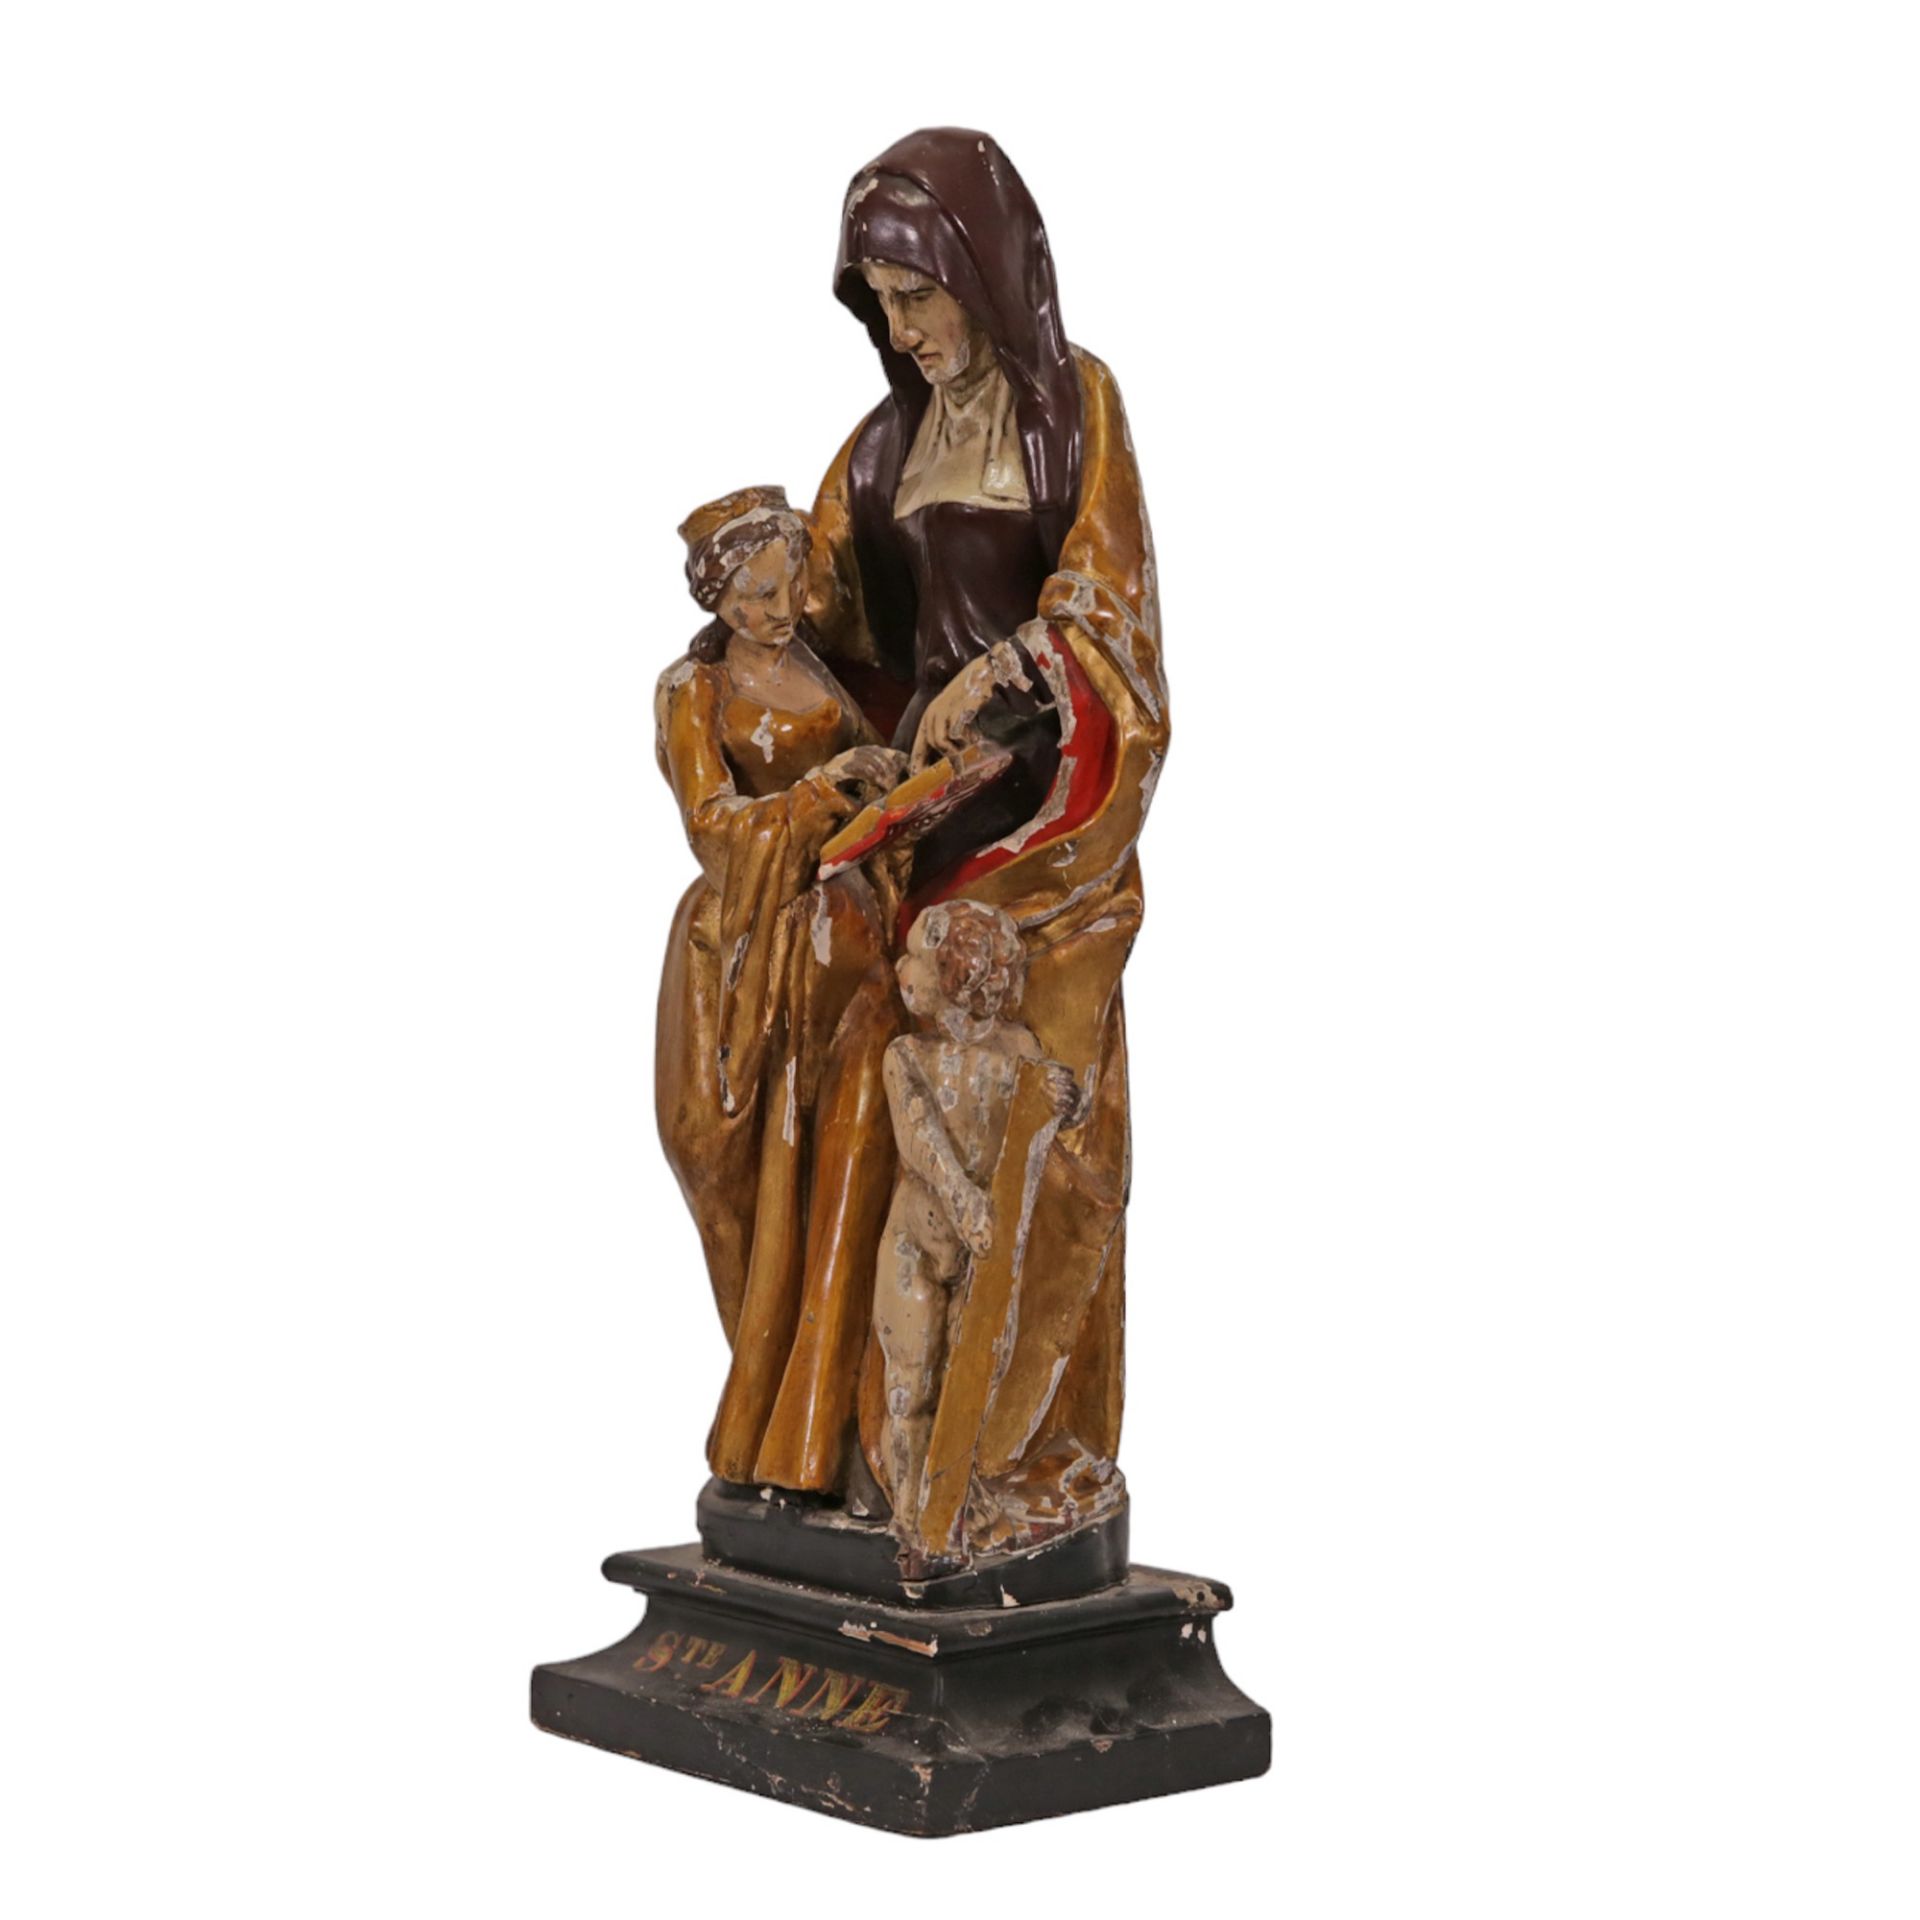 RARE, ANTIQUE, POLYCHROME WOODEN SCULPTURE "SAINT ANNE TRINITI", ON THE BASIS. FRANCE 19th CENTURY. - Image 4 of 13